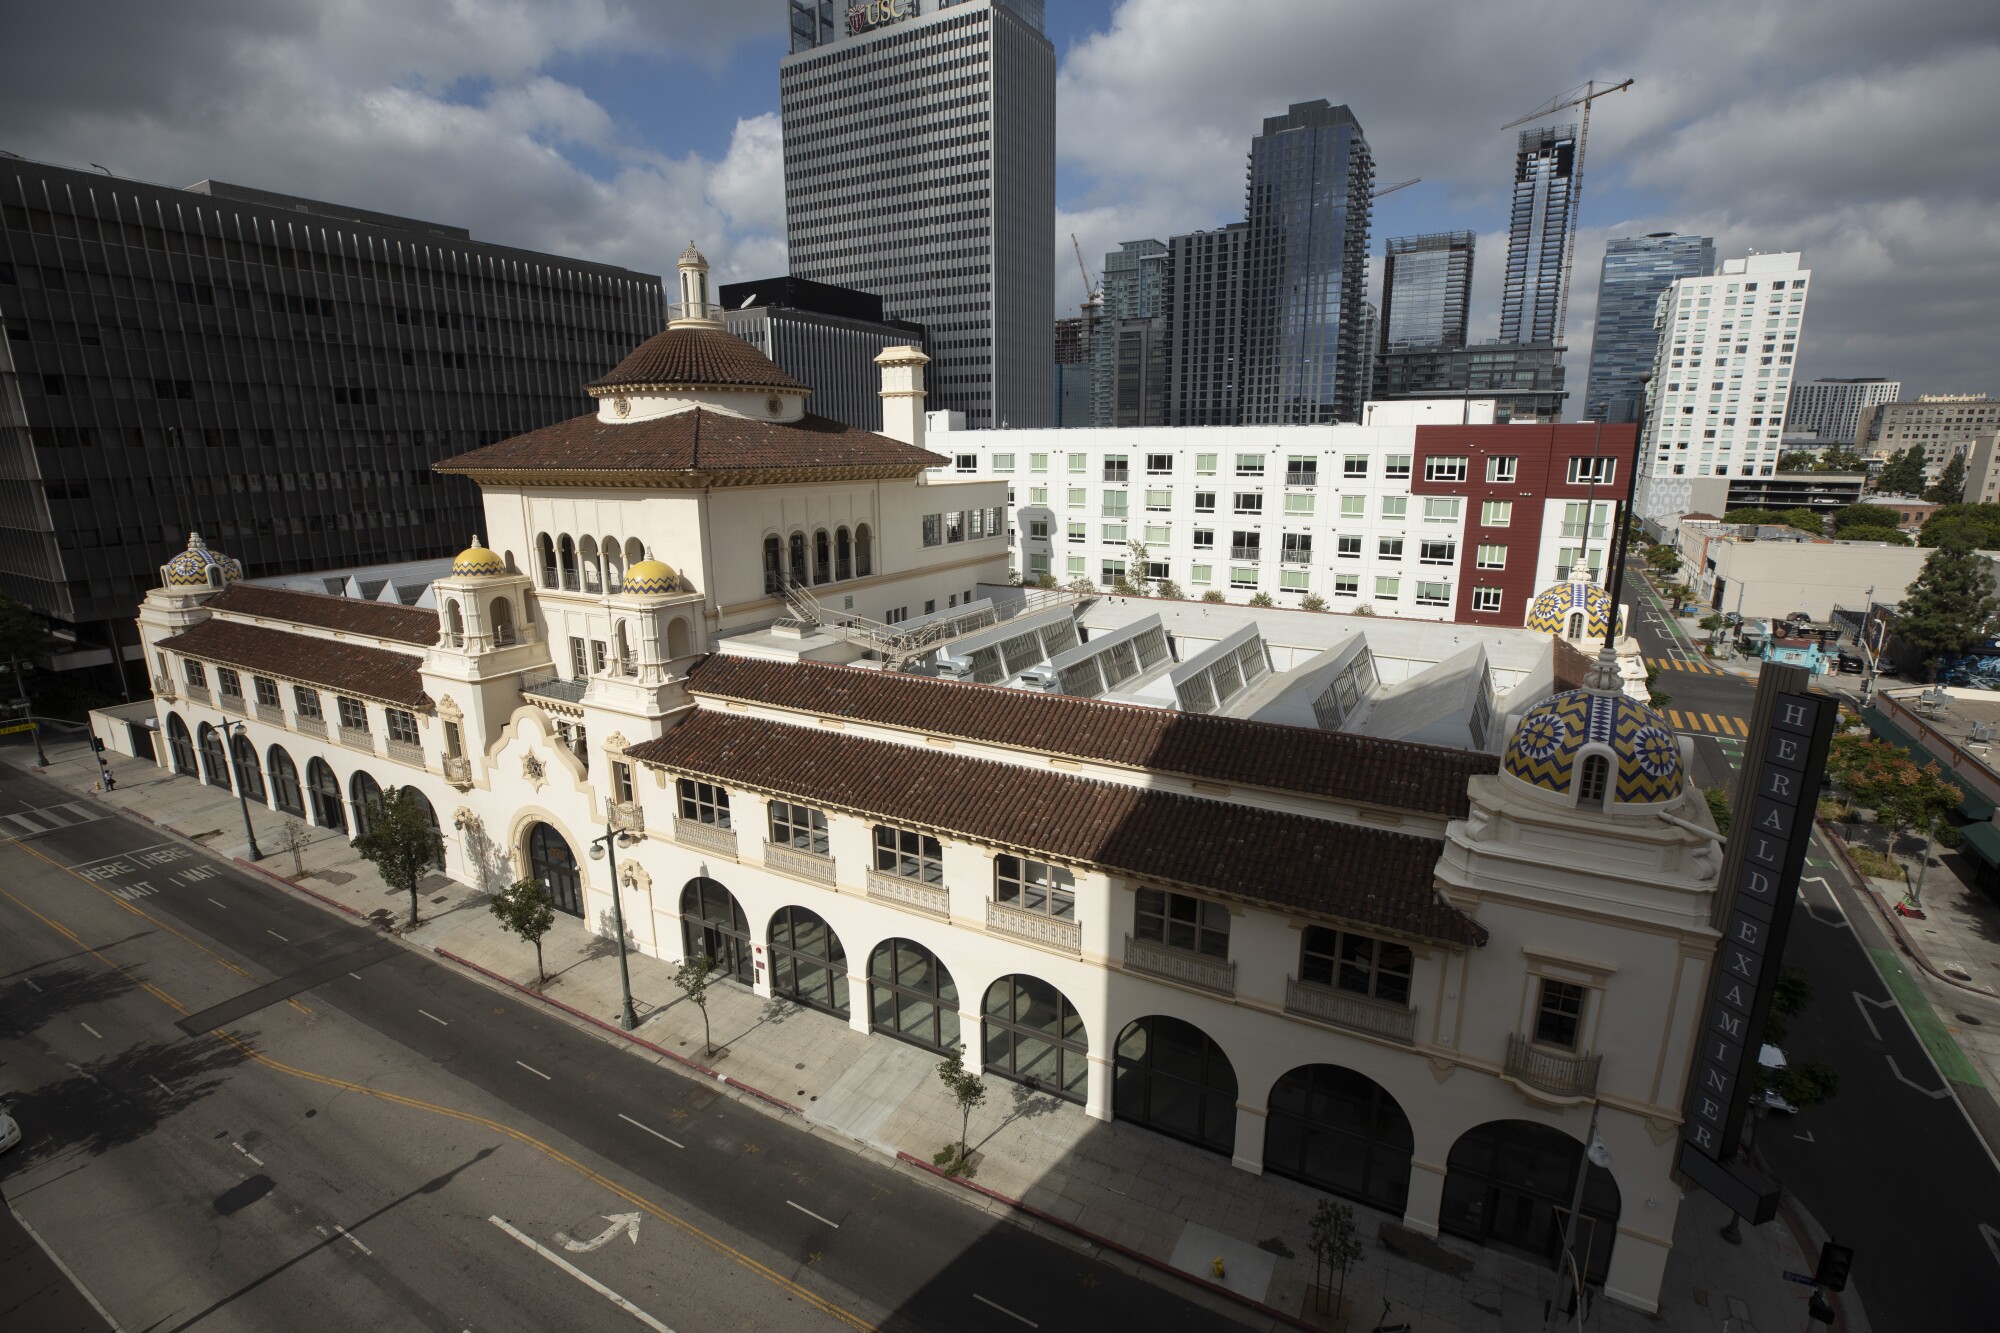 An image taken from above shows the facade of the freshly renovated Herald-Examiner building in sunlight